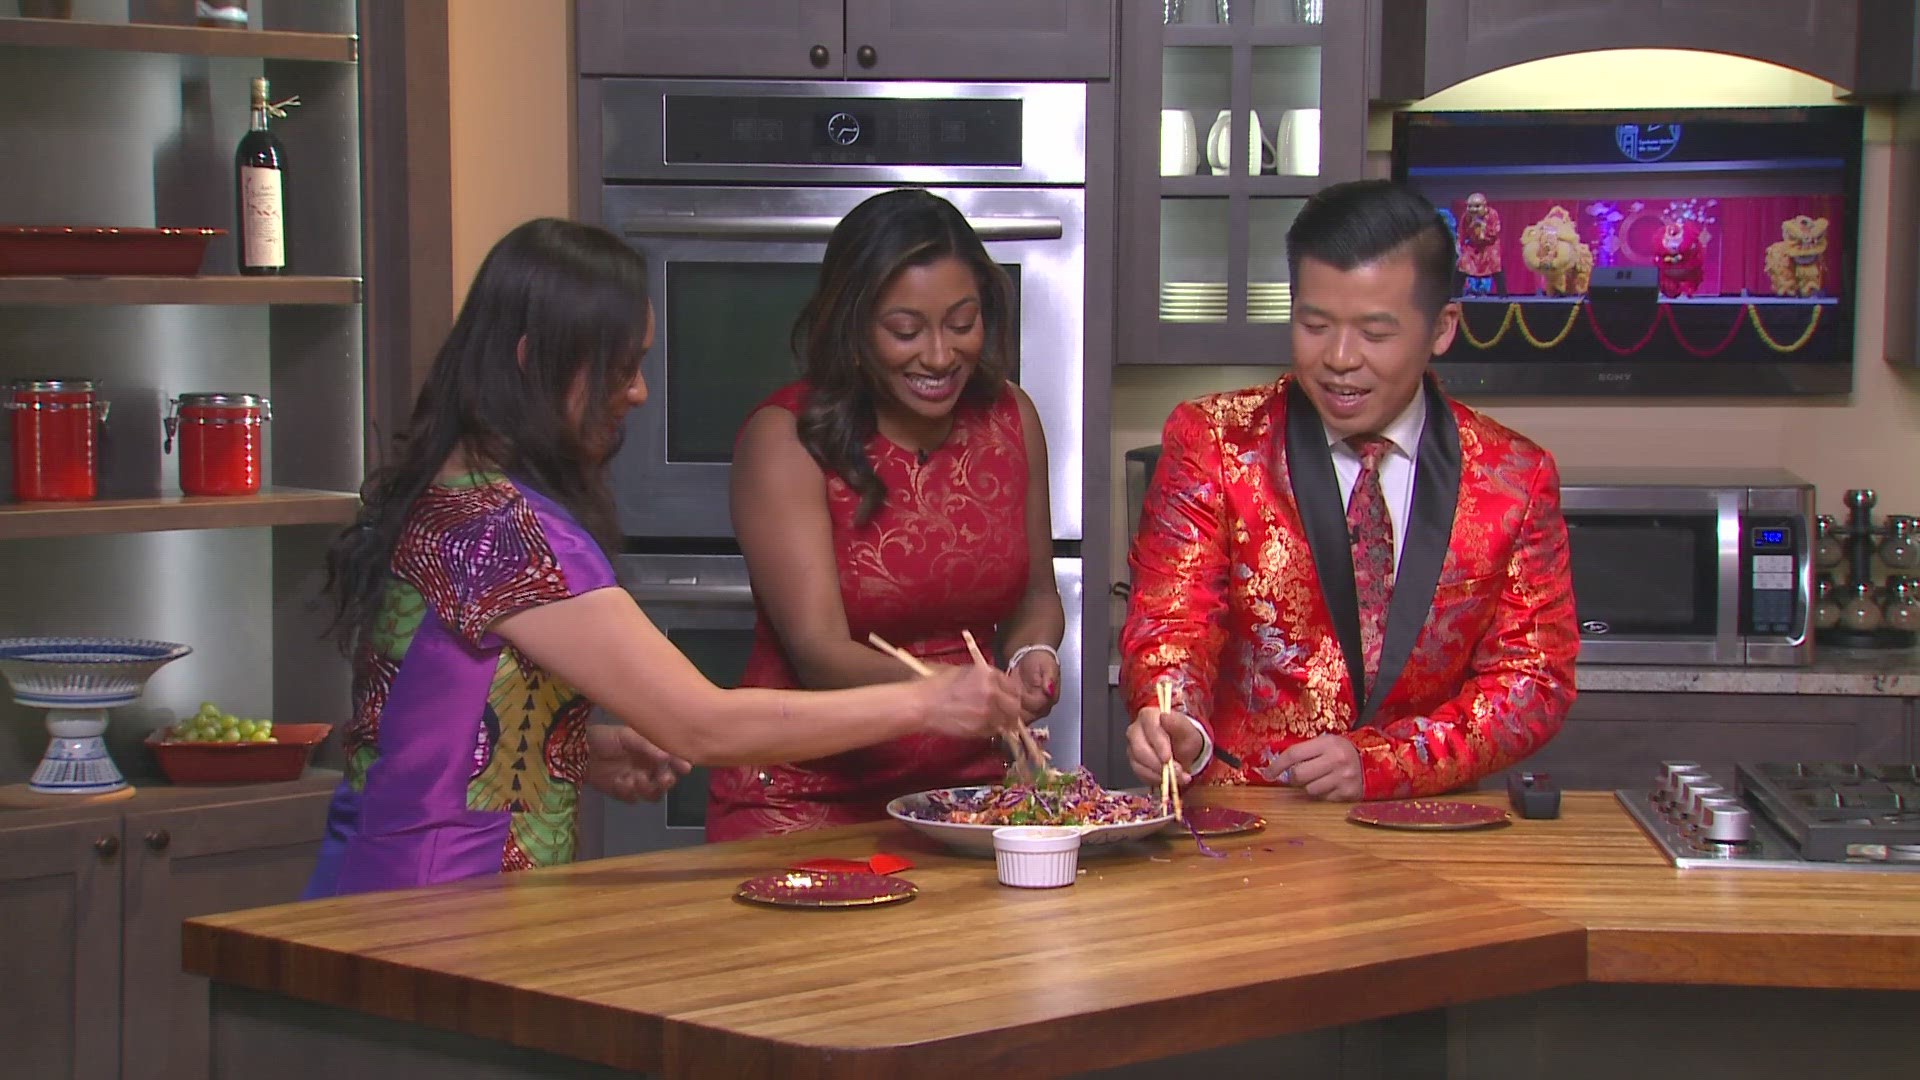 Lynn Yew Evers joined the show to talk about this weekend’s event at the Spokane Convention Center and she showed off a unique dish called Lo Sang.